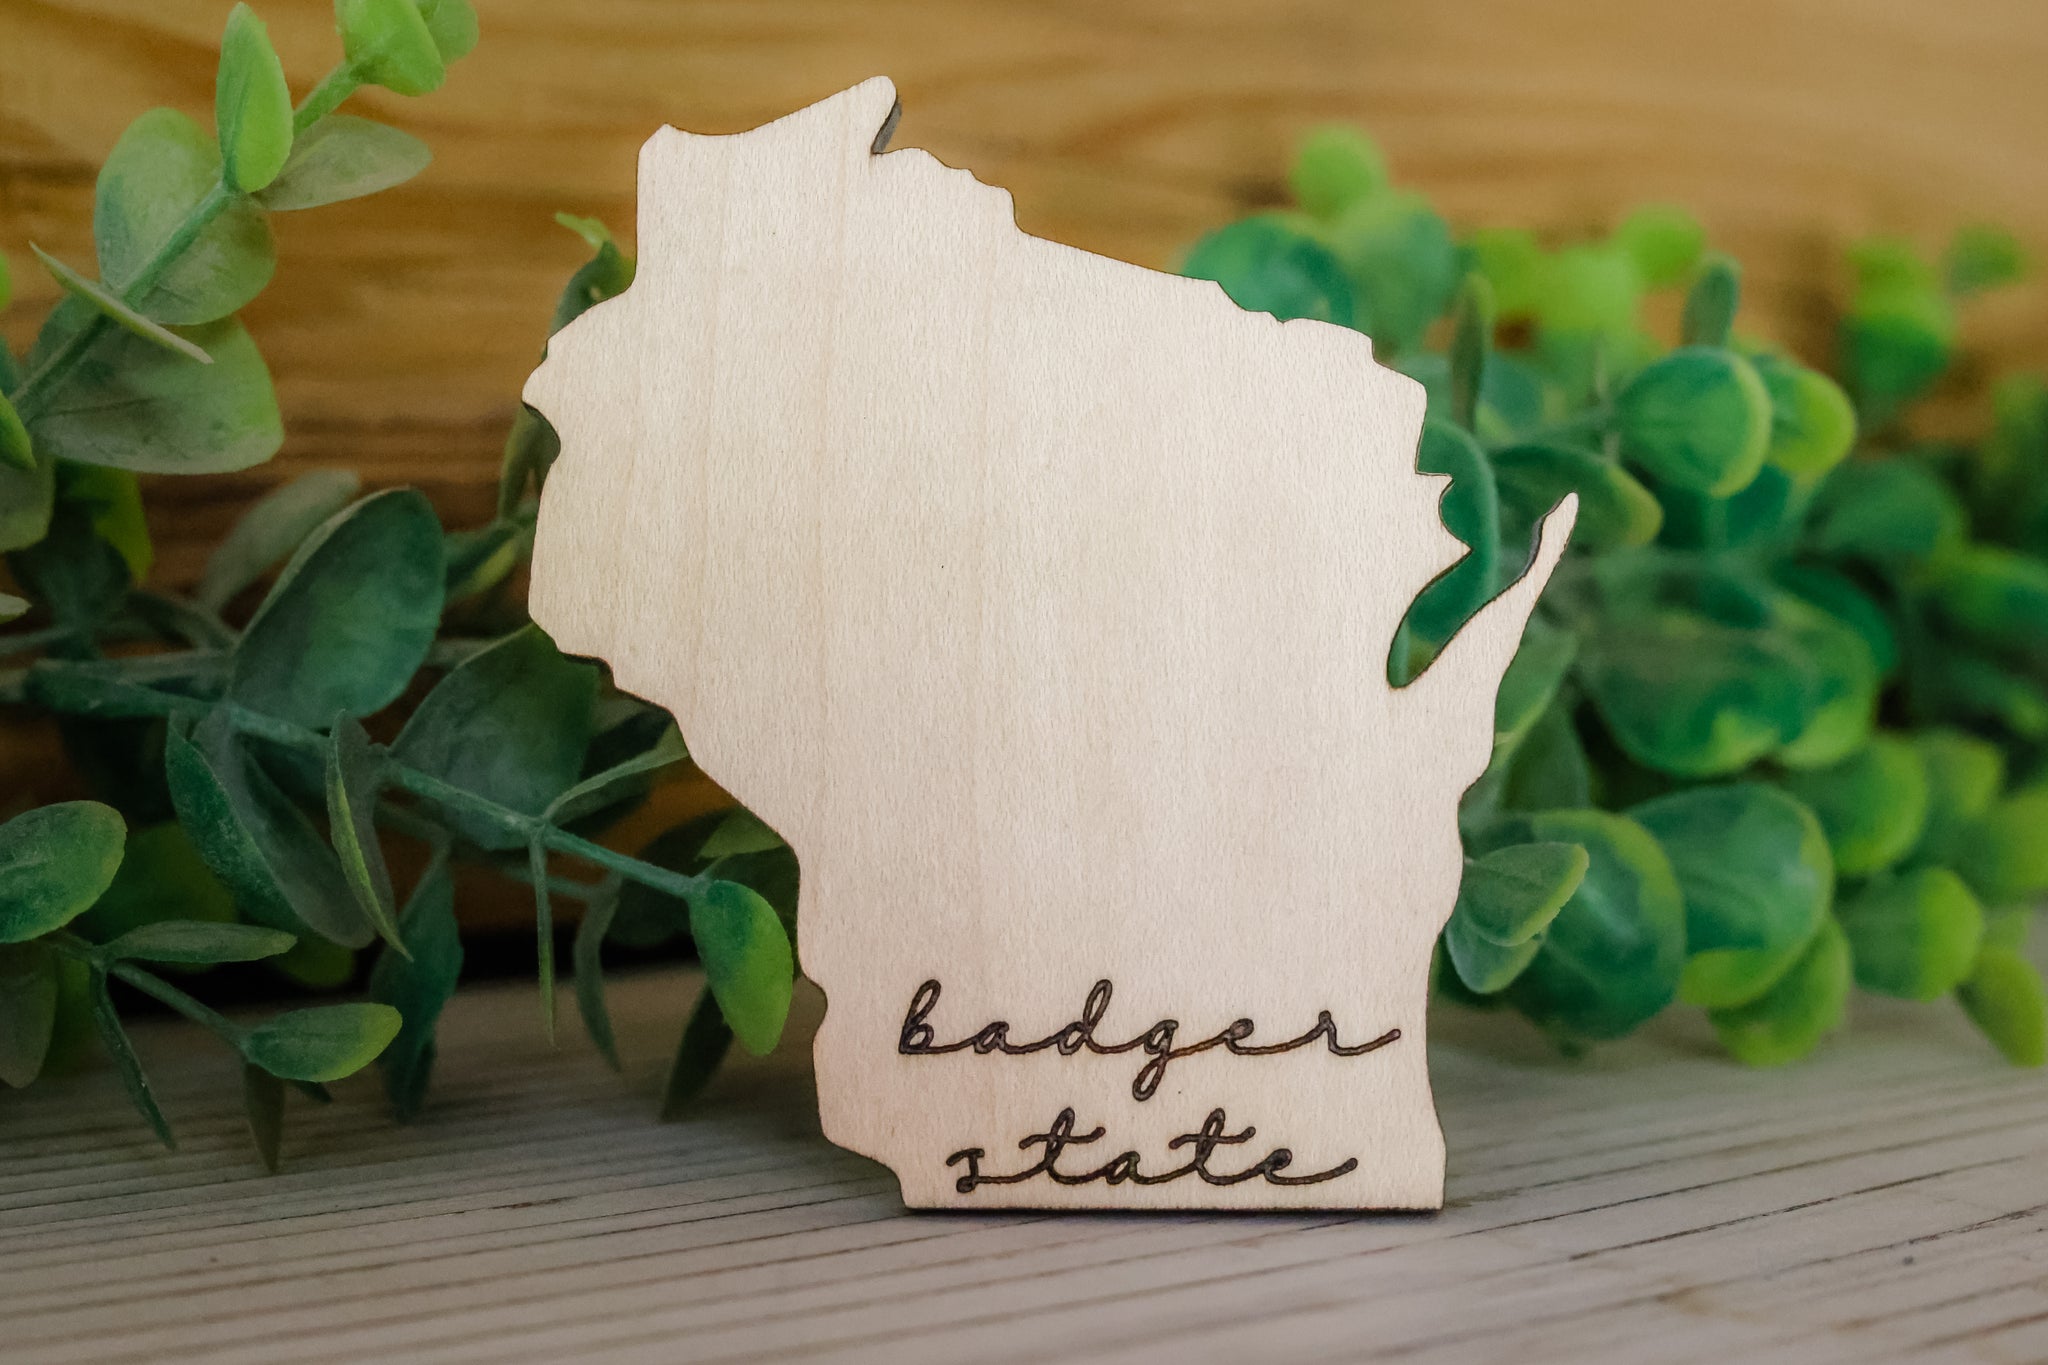 Wisconsin Badger State Wood Magnet